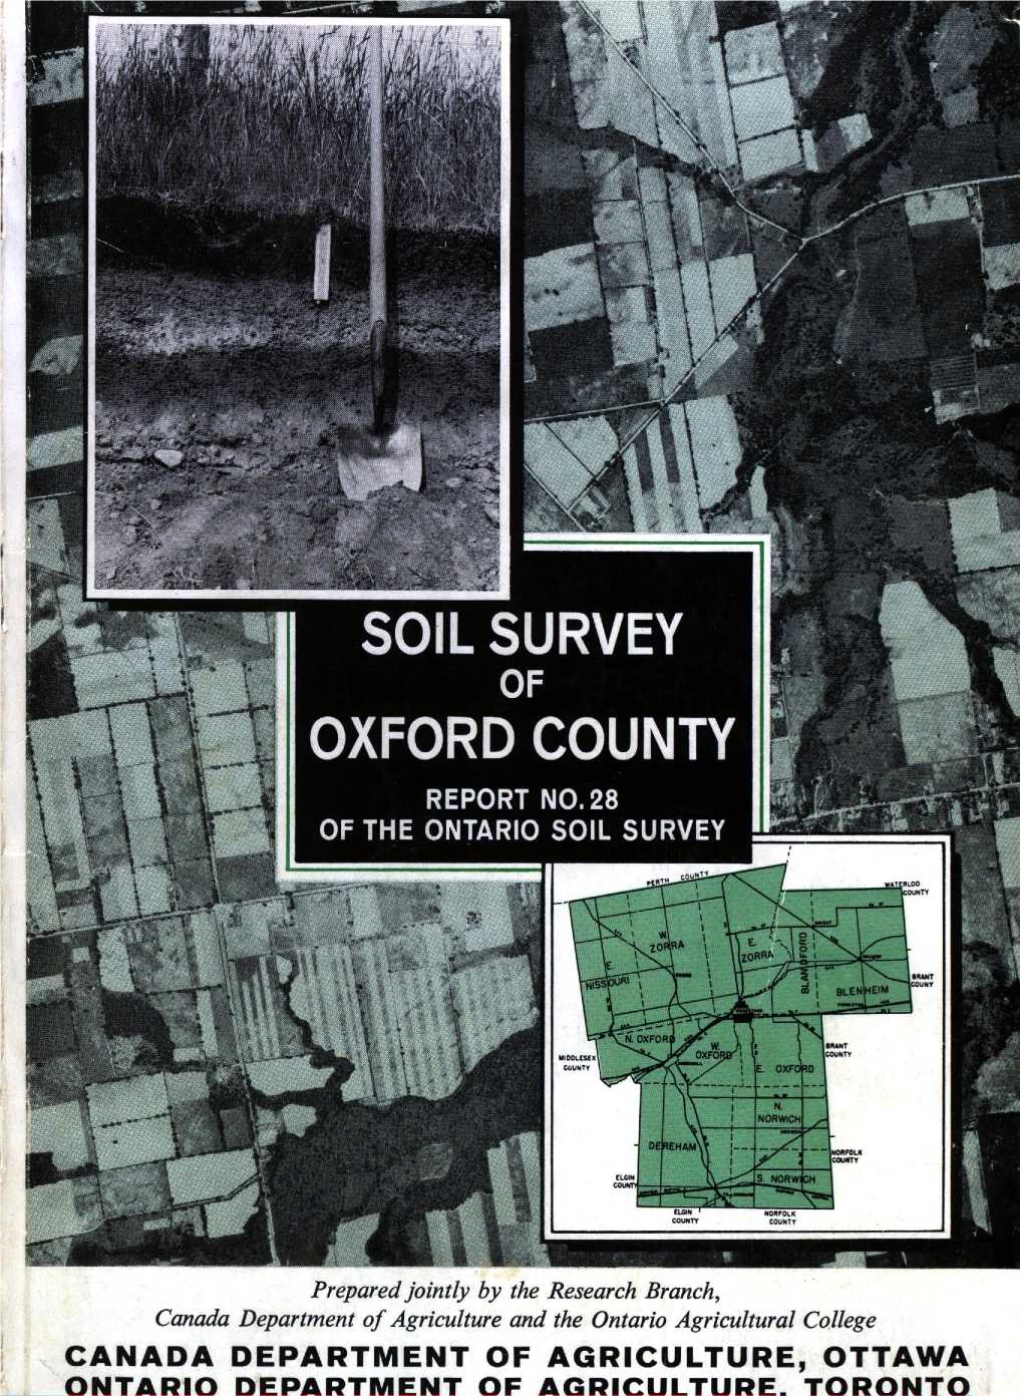 Ontario Department of Agriculture Toronto the Soil Survey of Oxford County